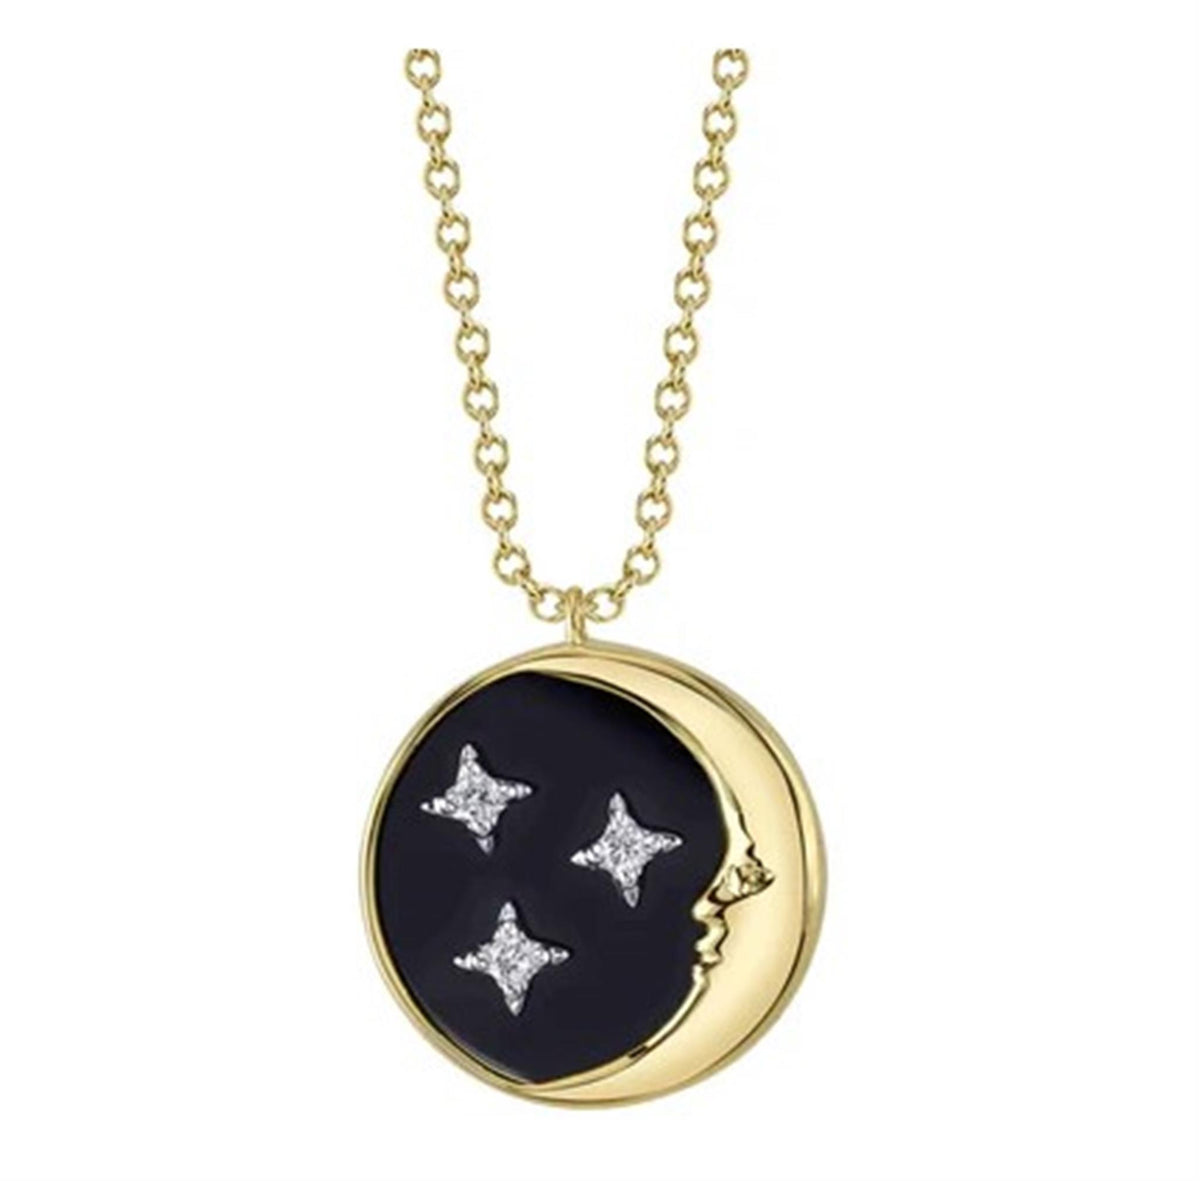 Shy Creation 14Kt Yellow Gold Crescent Moon Pendant With Black Onyx Inlay